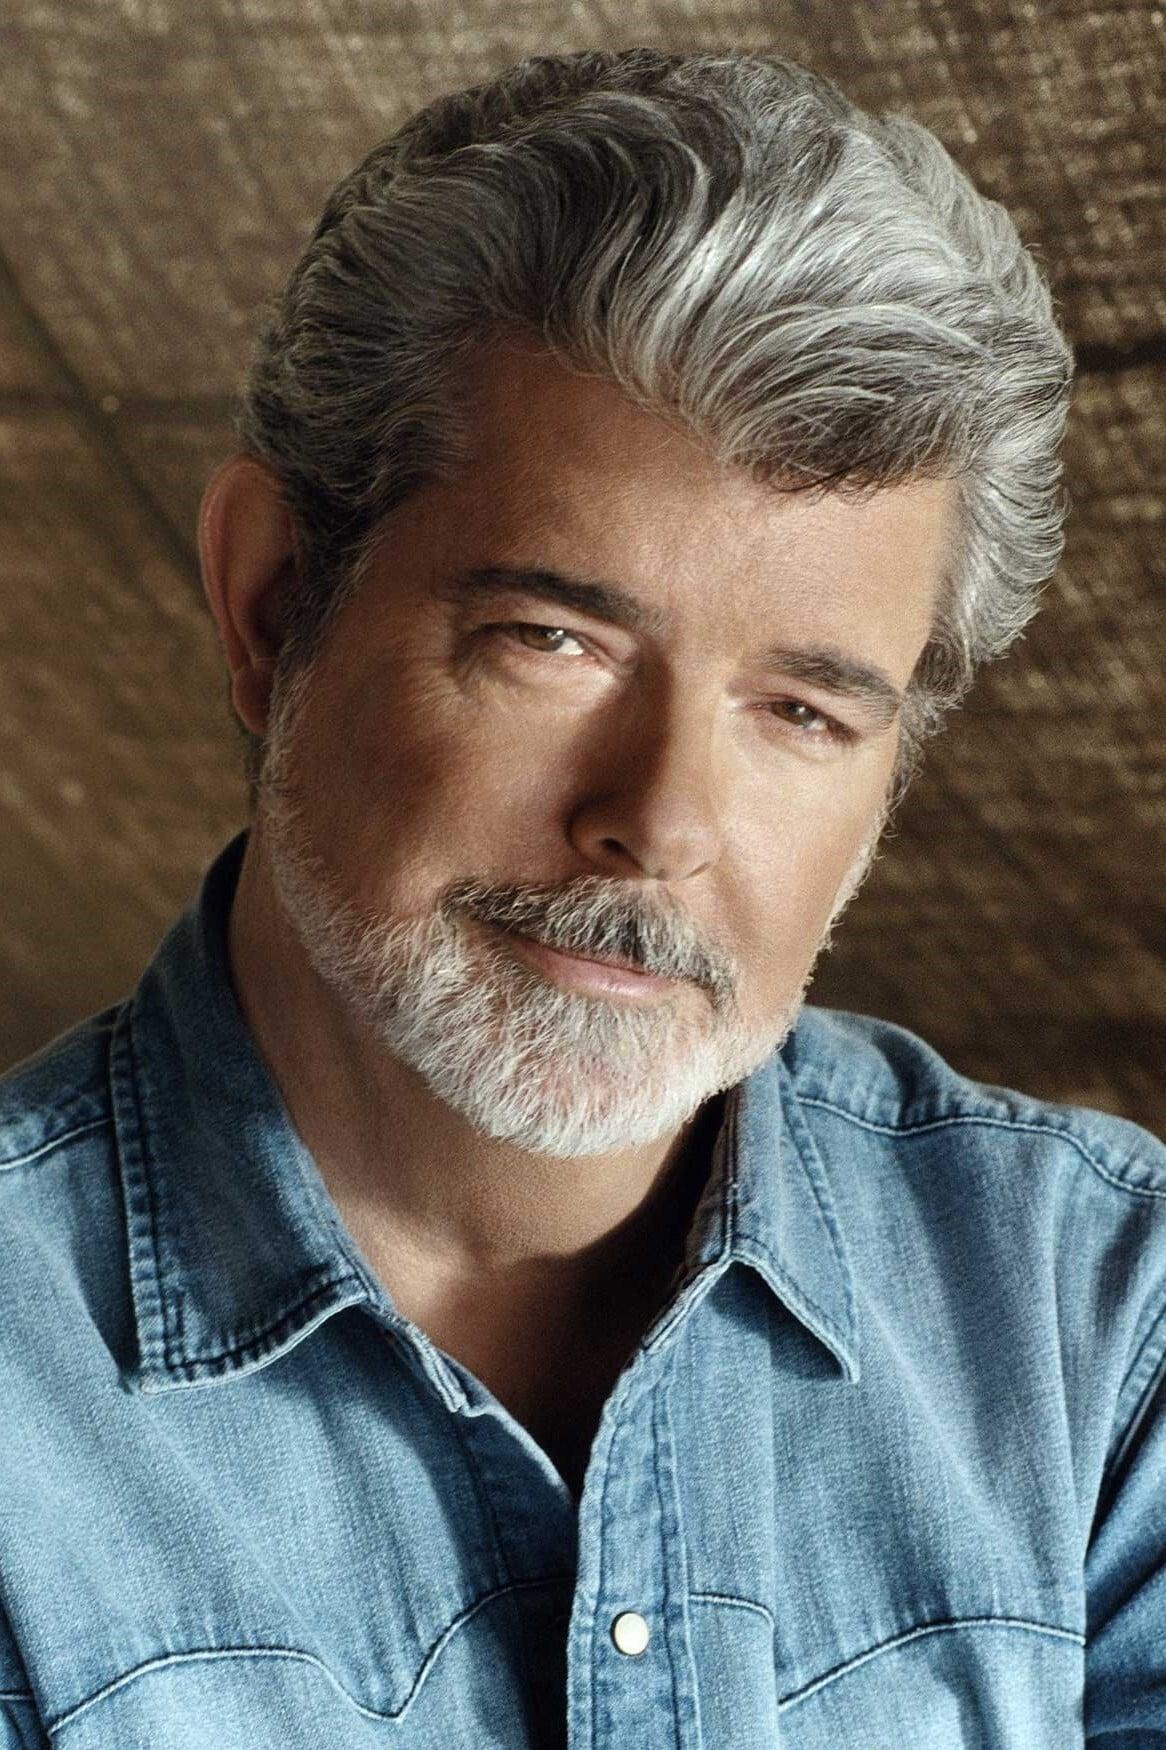 George Lucas | Disappointed Man